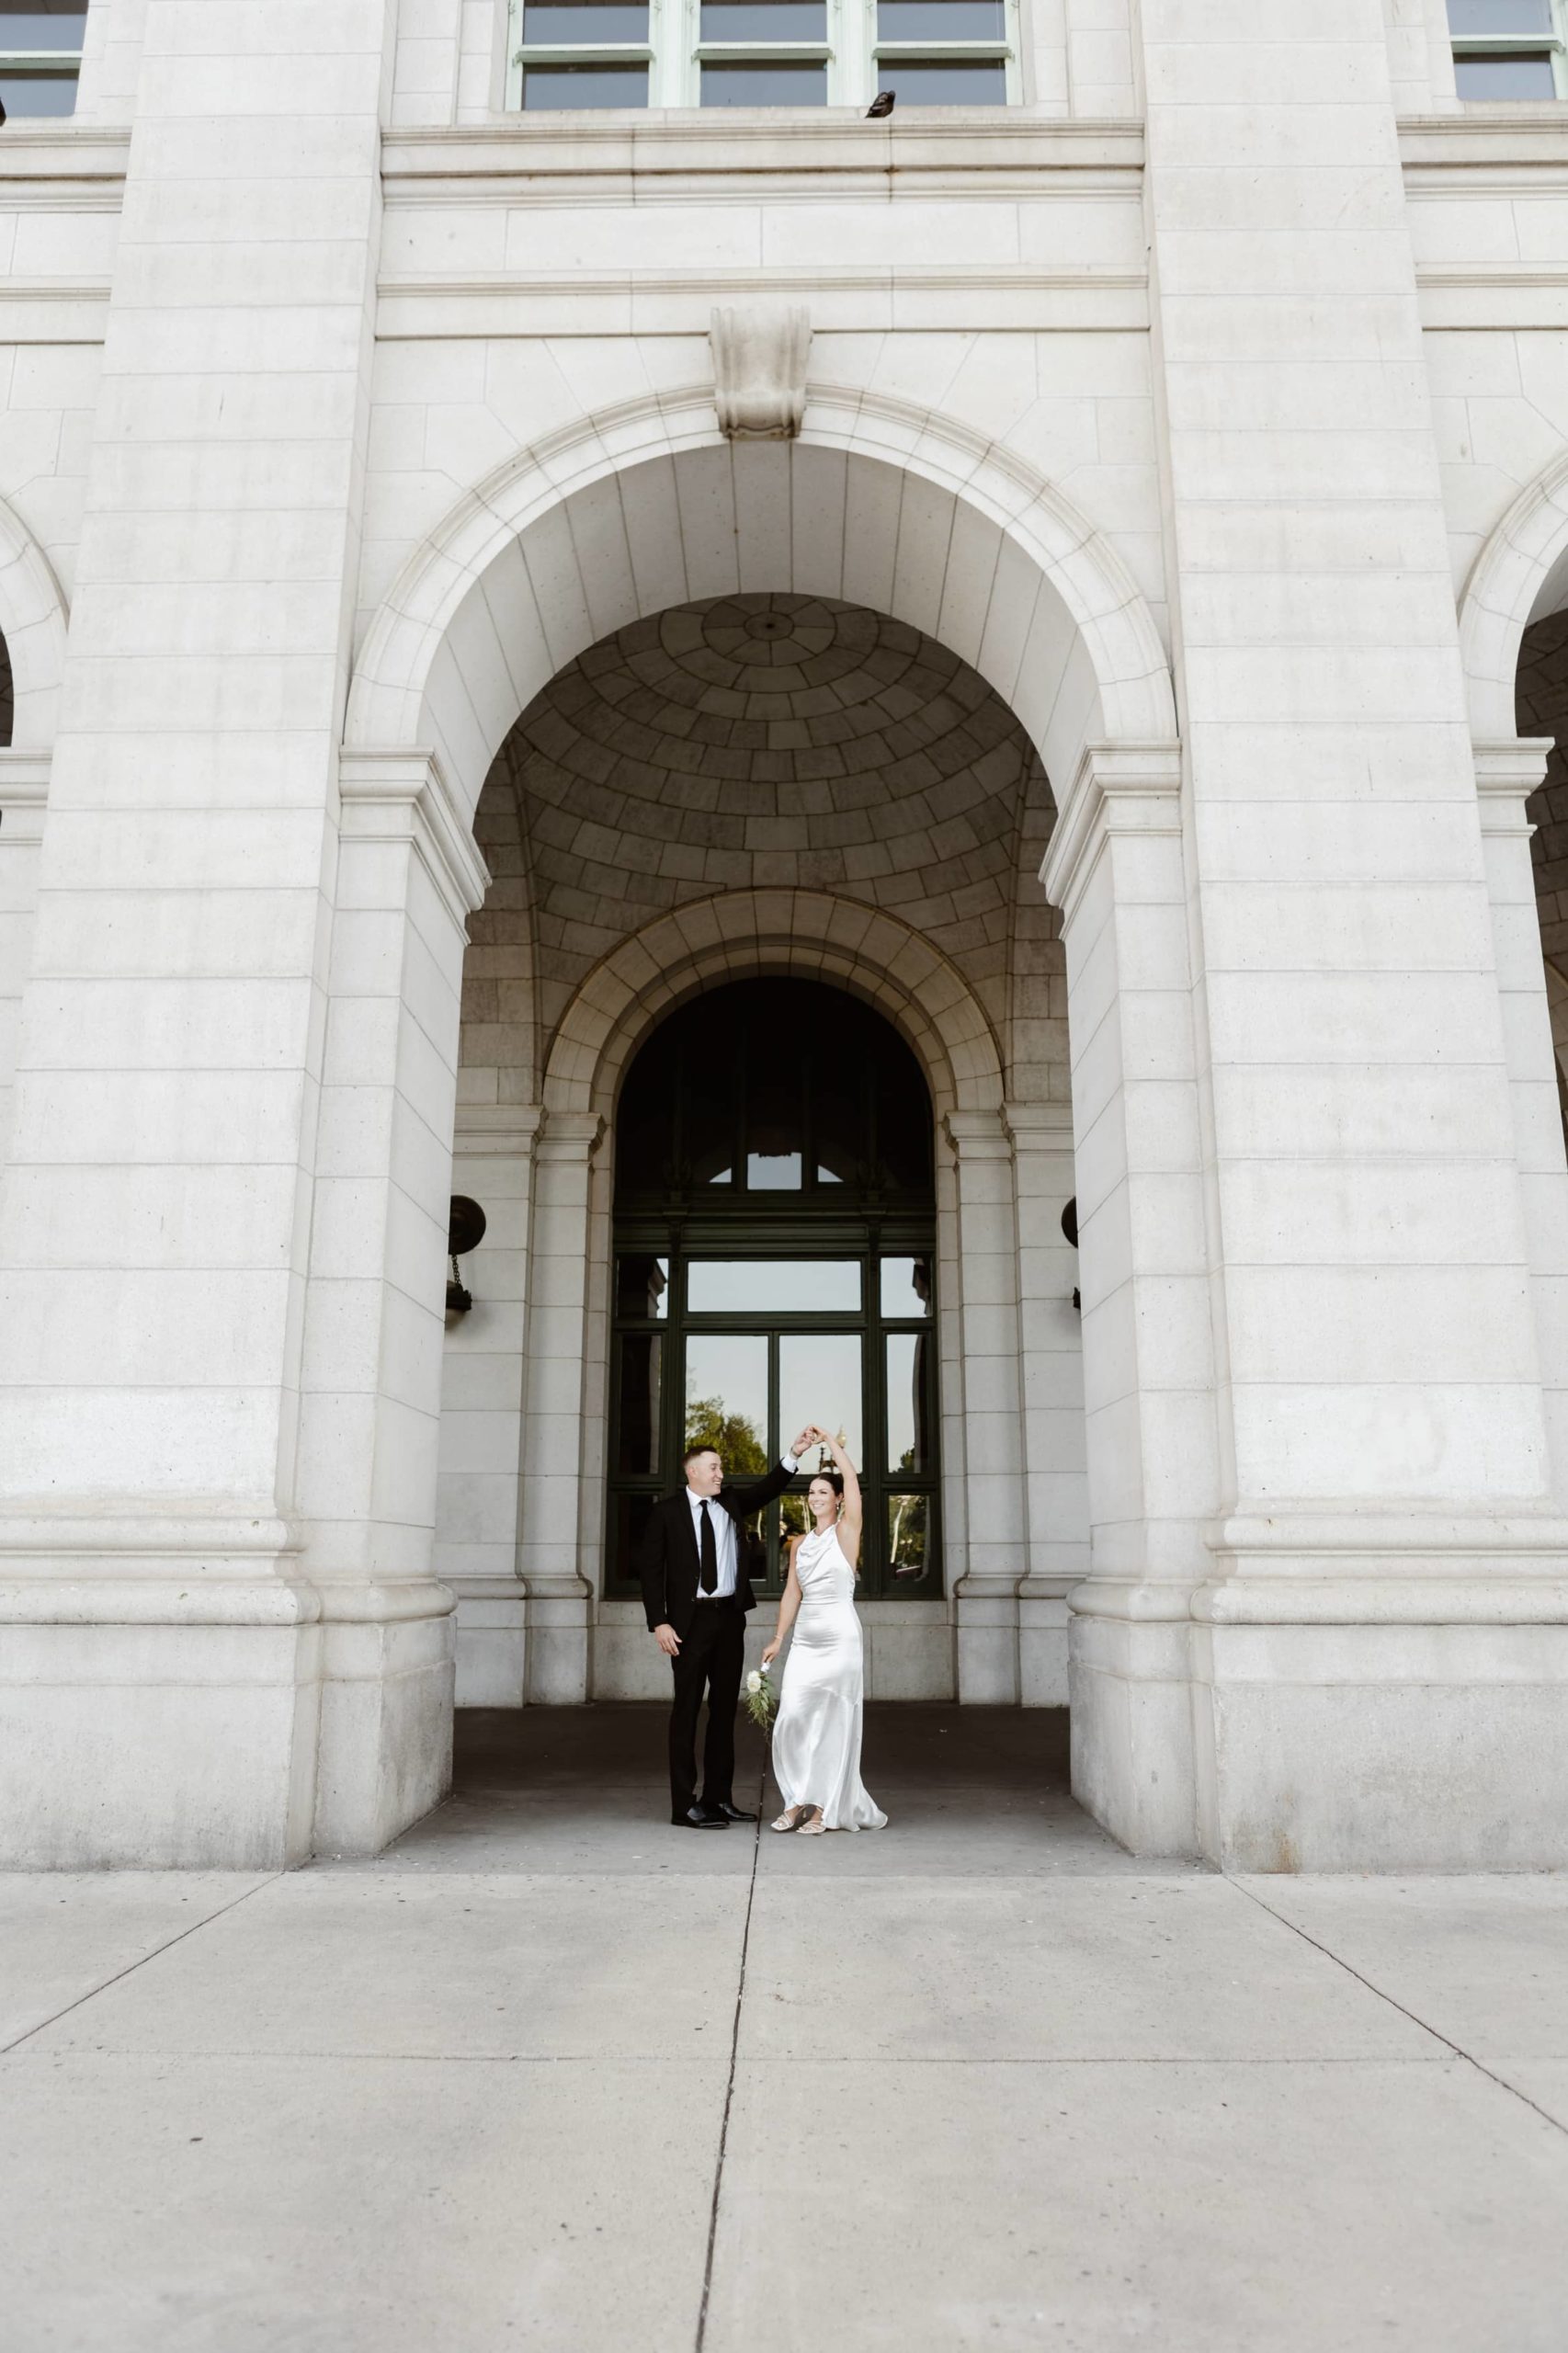 Groom spins bride under an arch at Union Station, DC